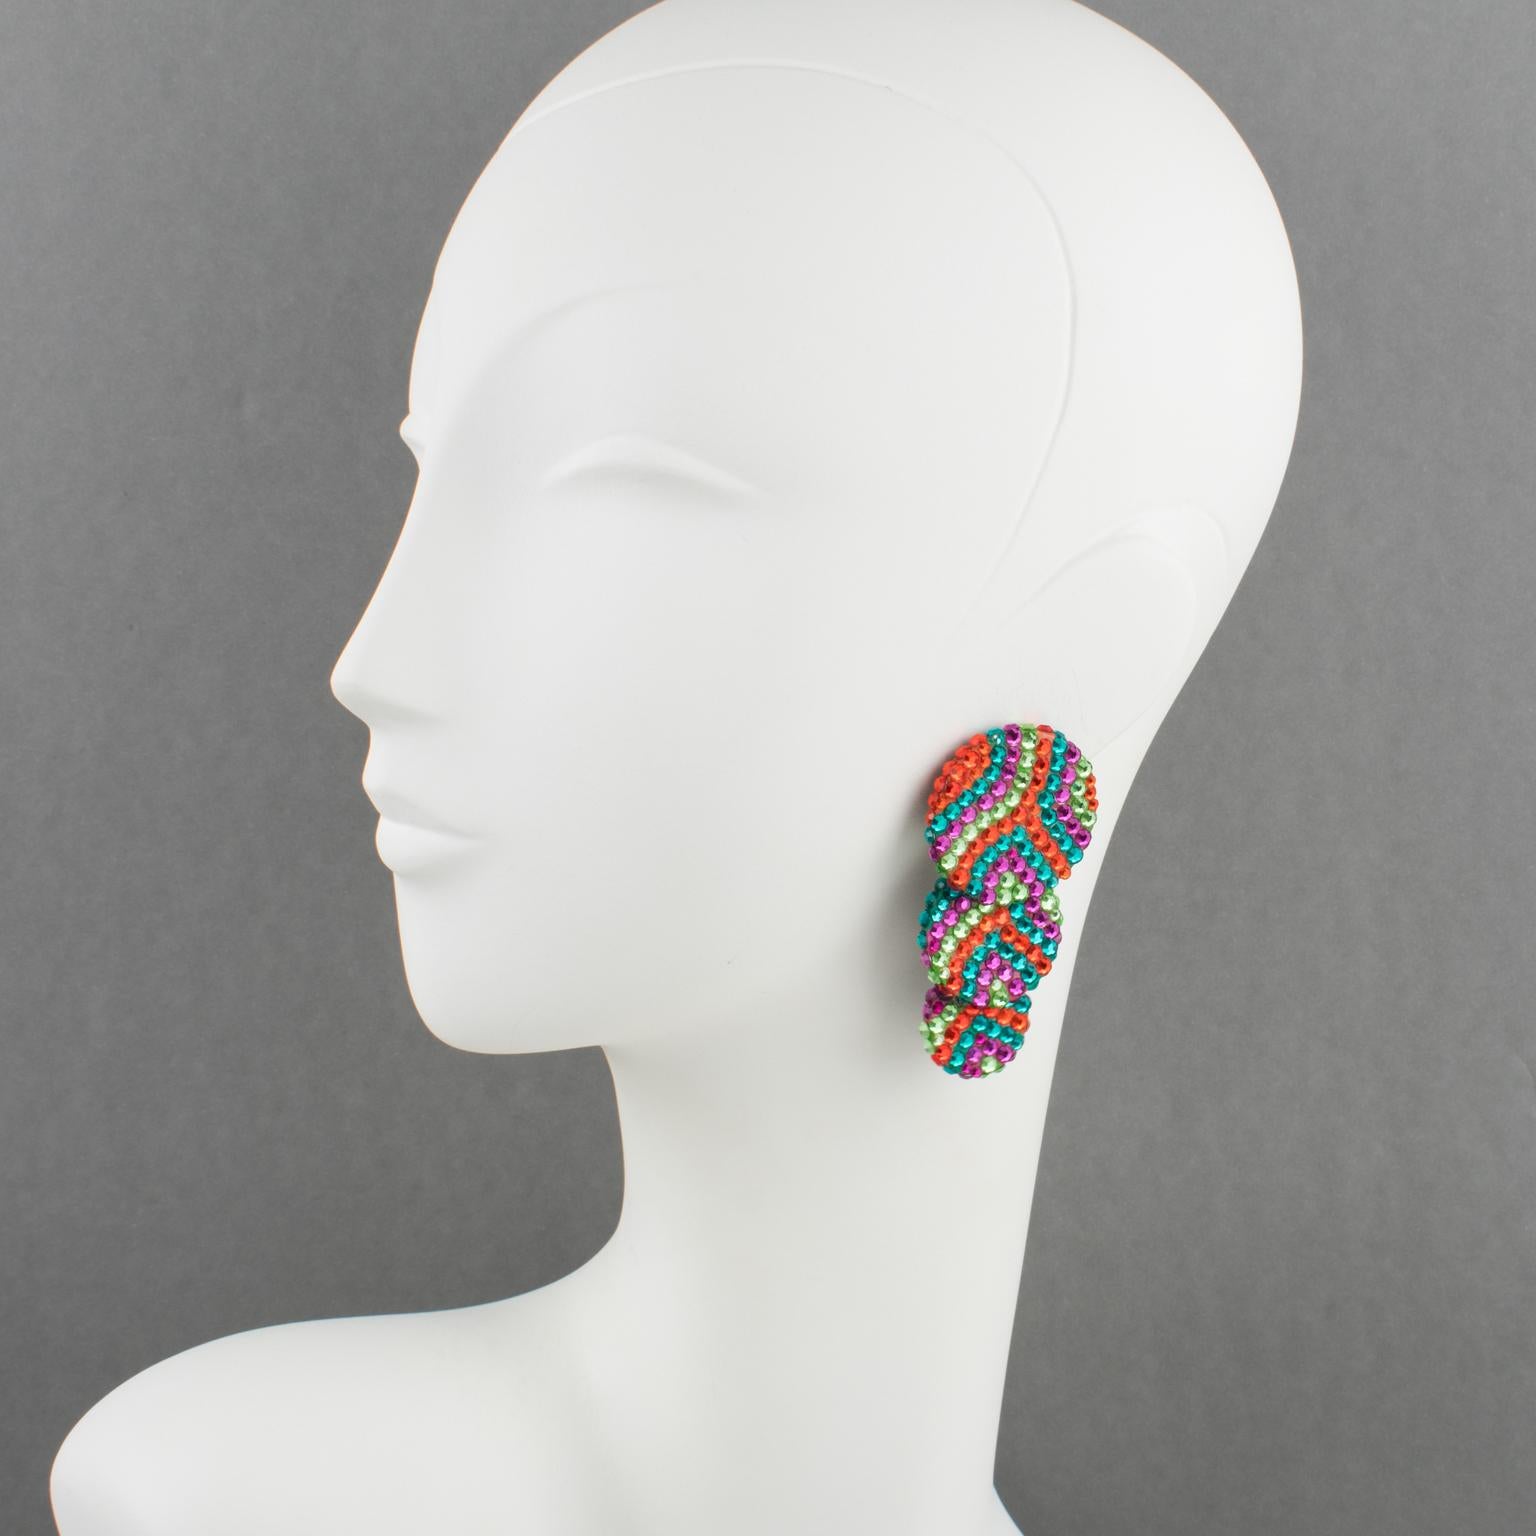 These lovely statement clip-on earrings were designed by Richard Kerr in the 1980s. They are made up of his signature pave rhinestones. Featuring cascading graduated disk shapes all covered with colorful crystal rhinestones on a black resin